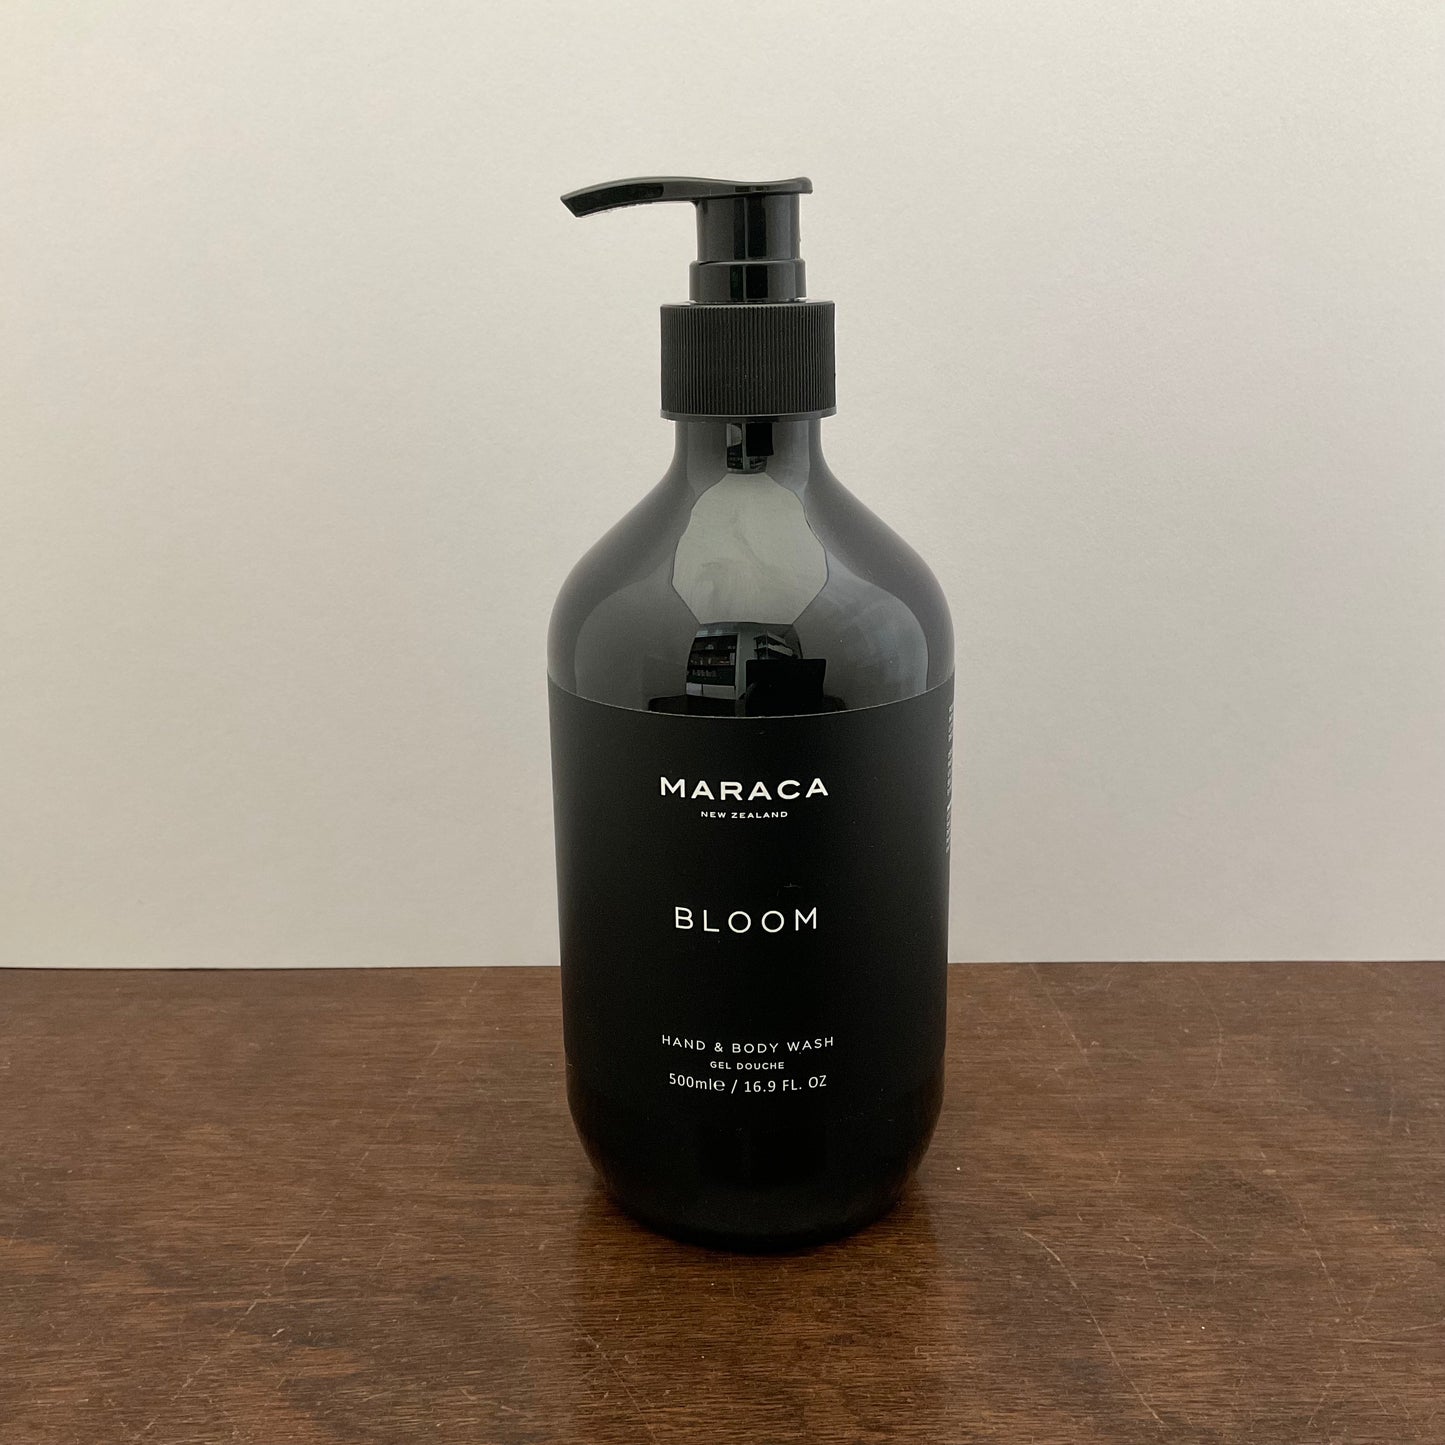 Hand and Body wash with a floral fragrance made by Maraca